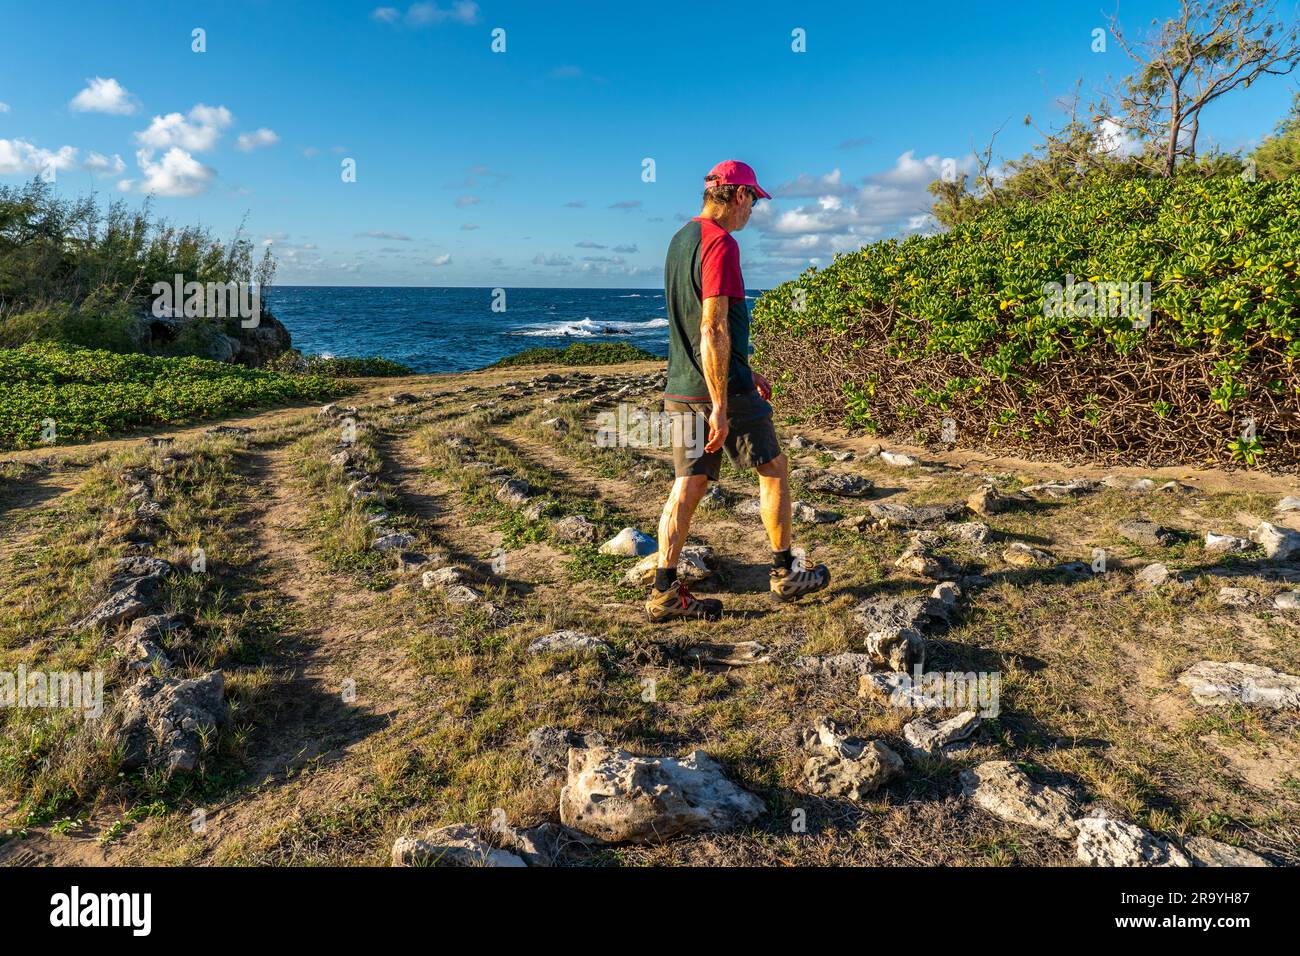 Mature Caucasian man walking the path of a labyrinth laid out around a large naupaka bush marked with lithified rocks by the ocean, Mahaulepu Stock Photo